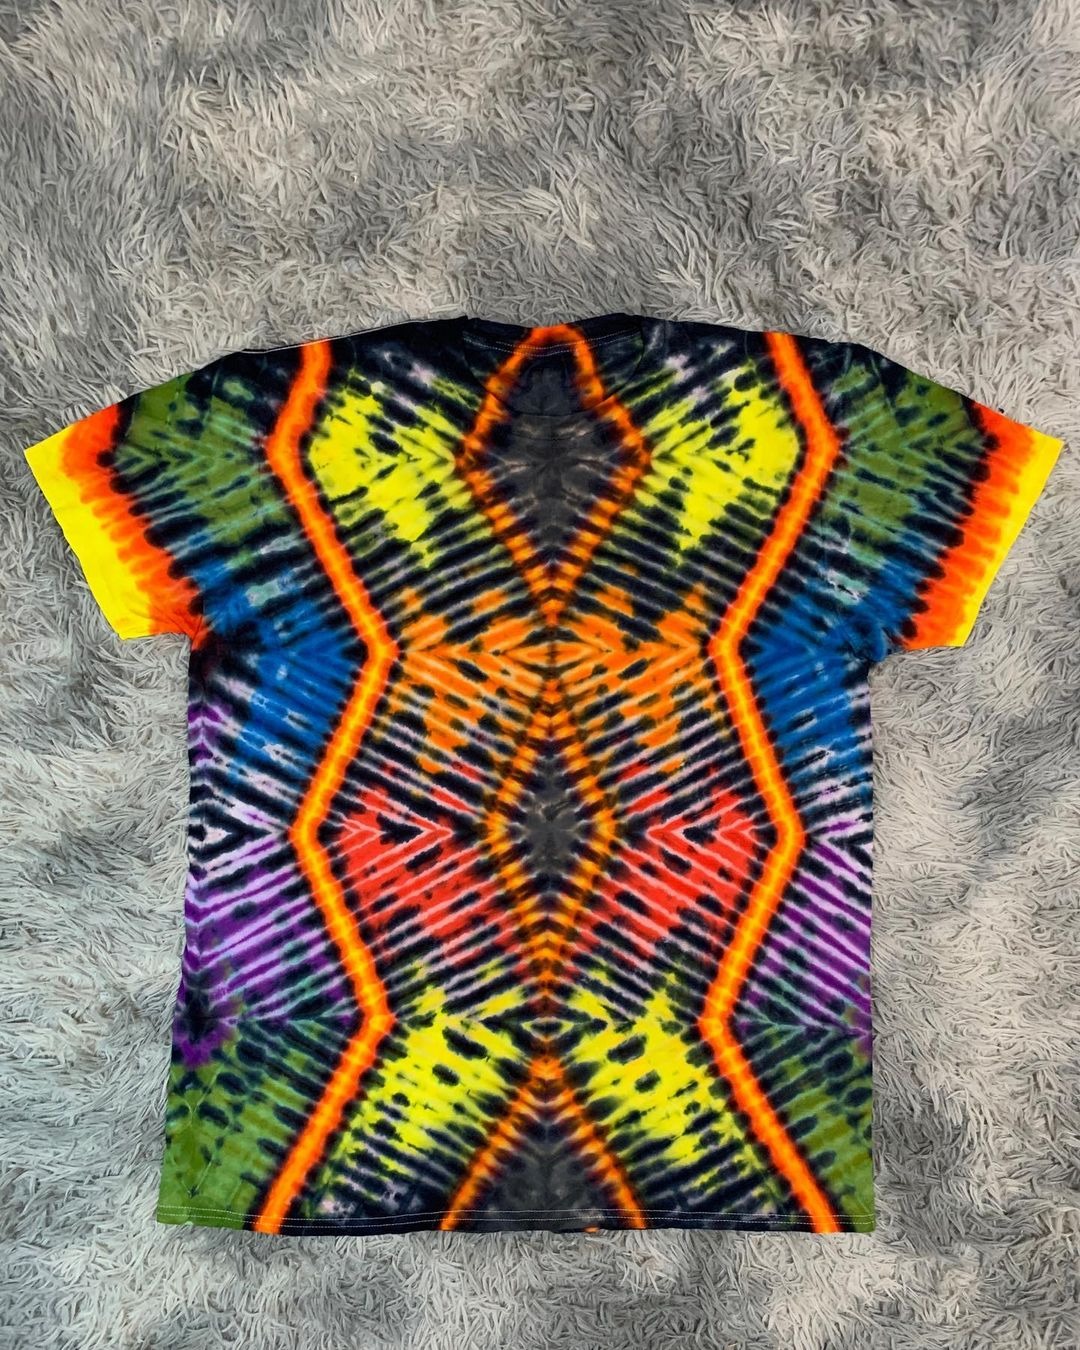 A Psychedelic-Eccentric Tee